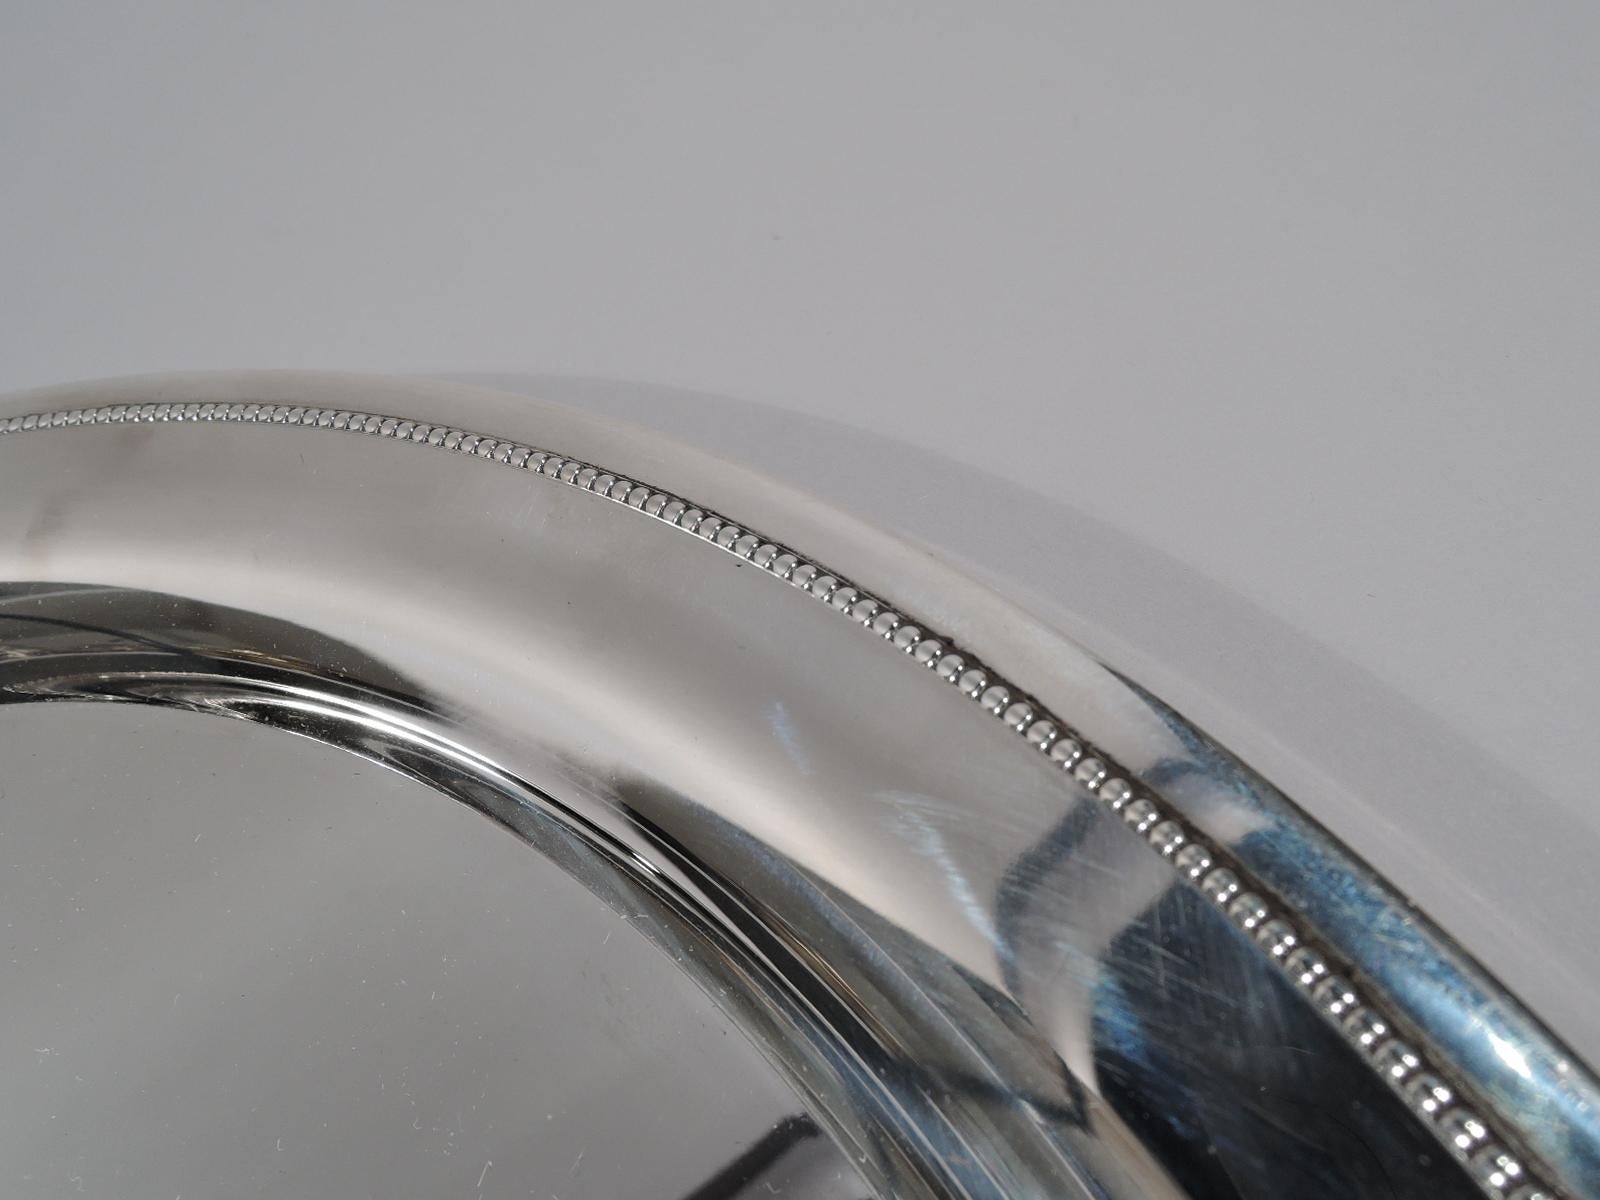 Modern Classical sterling silver tray. Made by Tiffany & Co. in New York. Round with deep well. Rim has finely beaded border. Fully marked including postwar pattern no. 23501. Weight: 21 troy ounces.